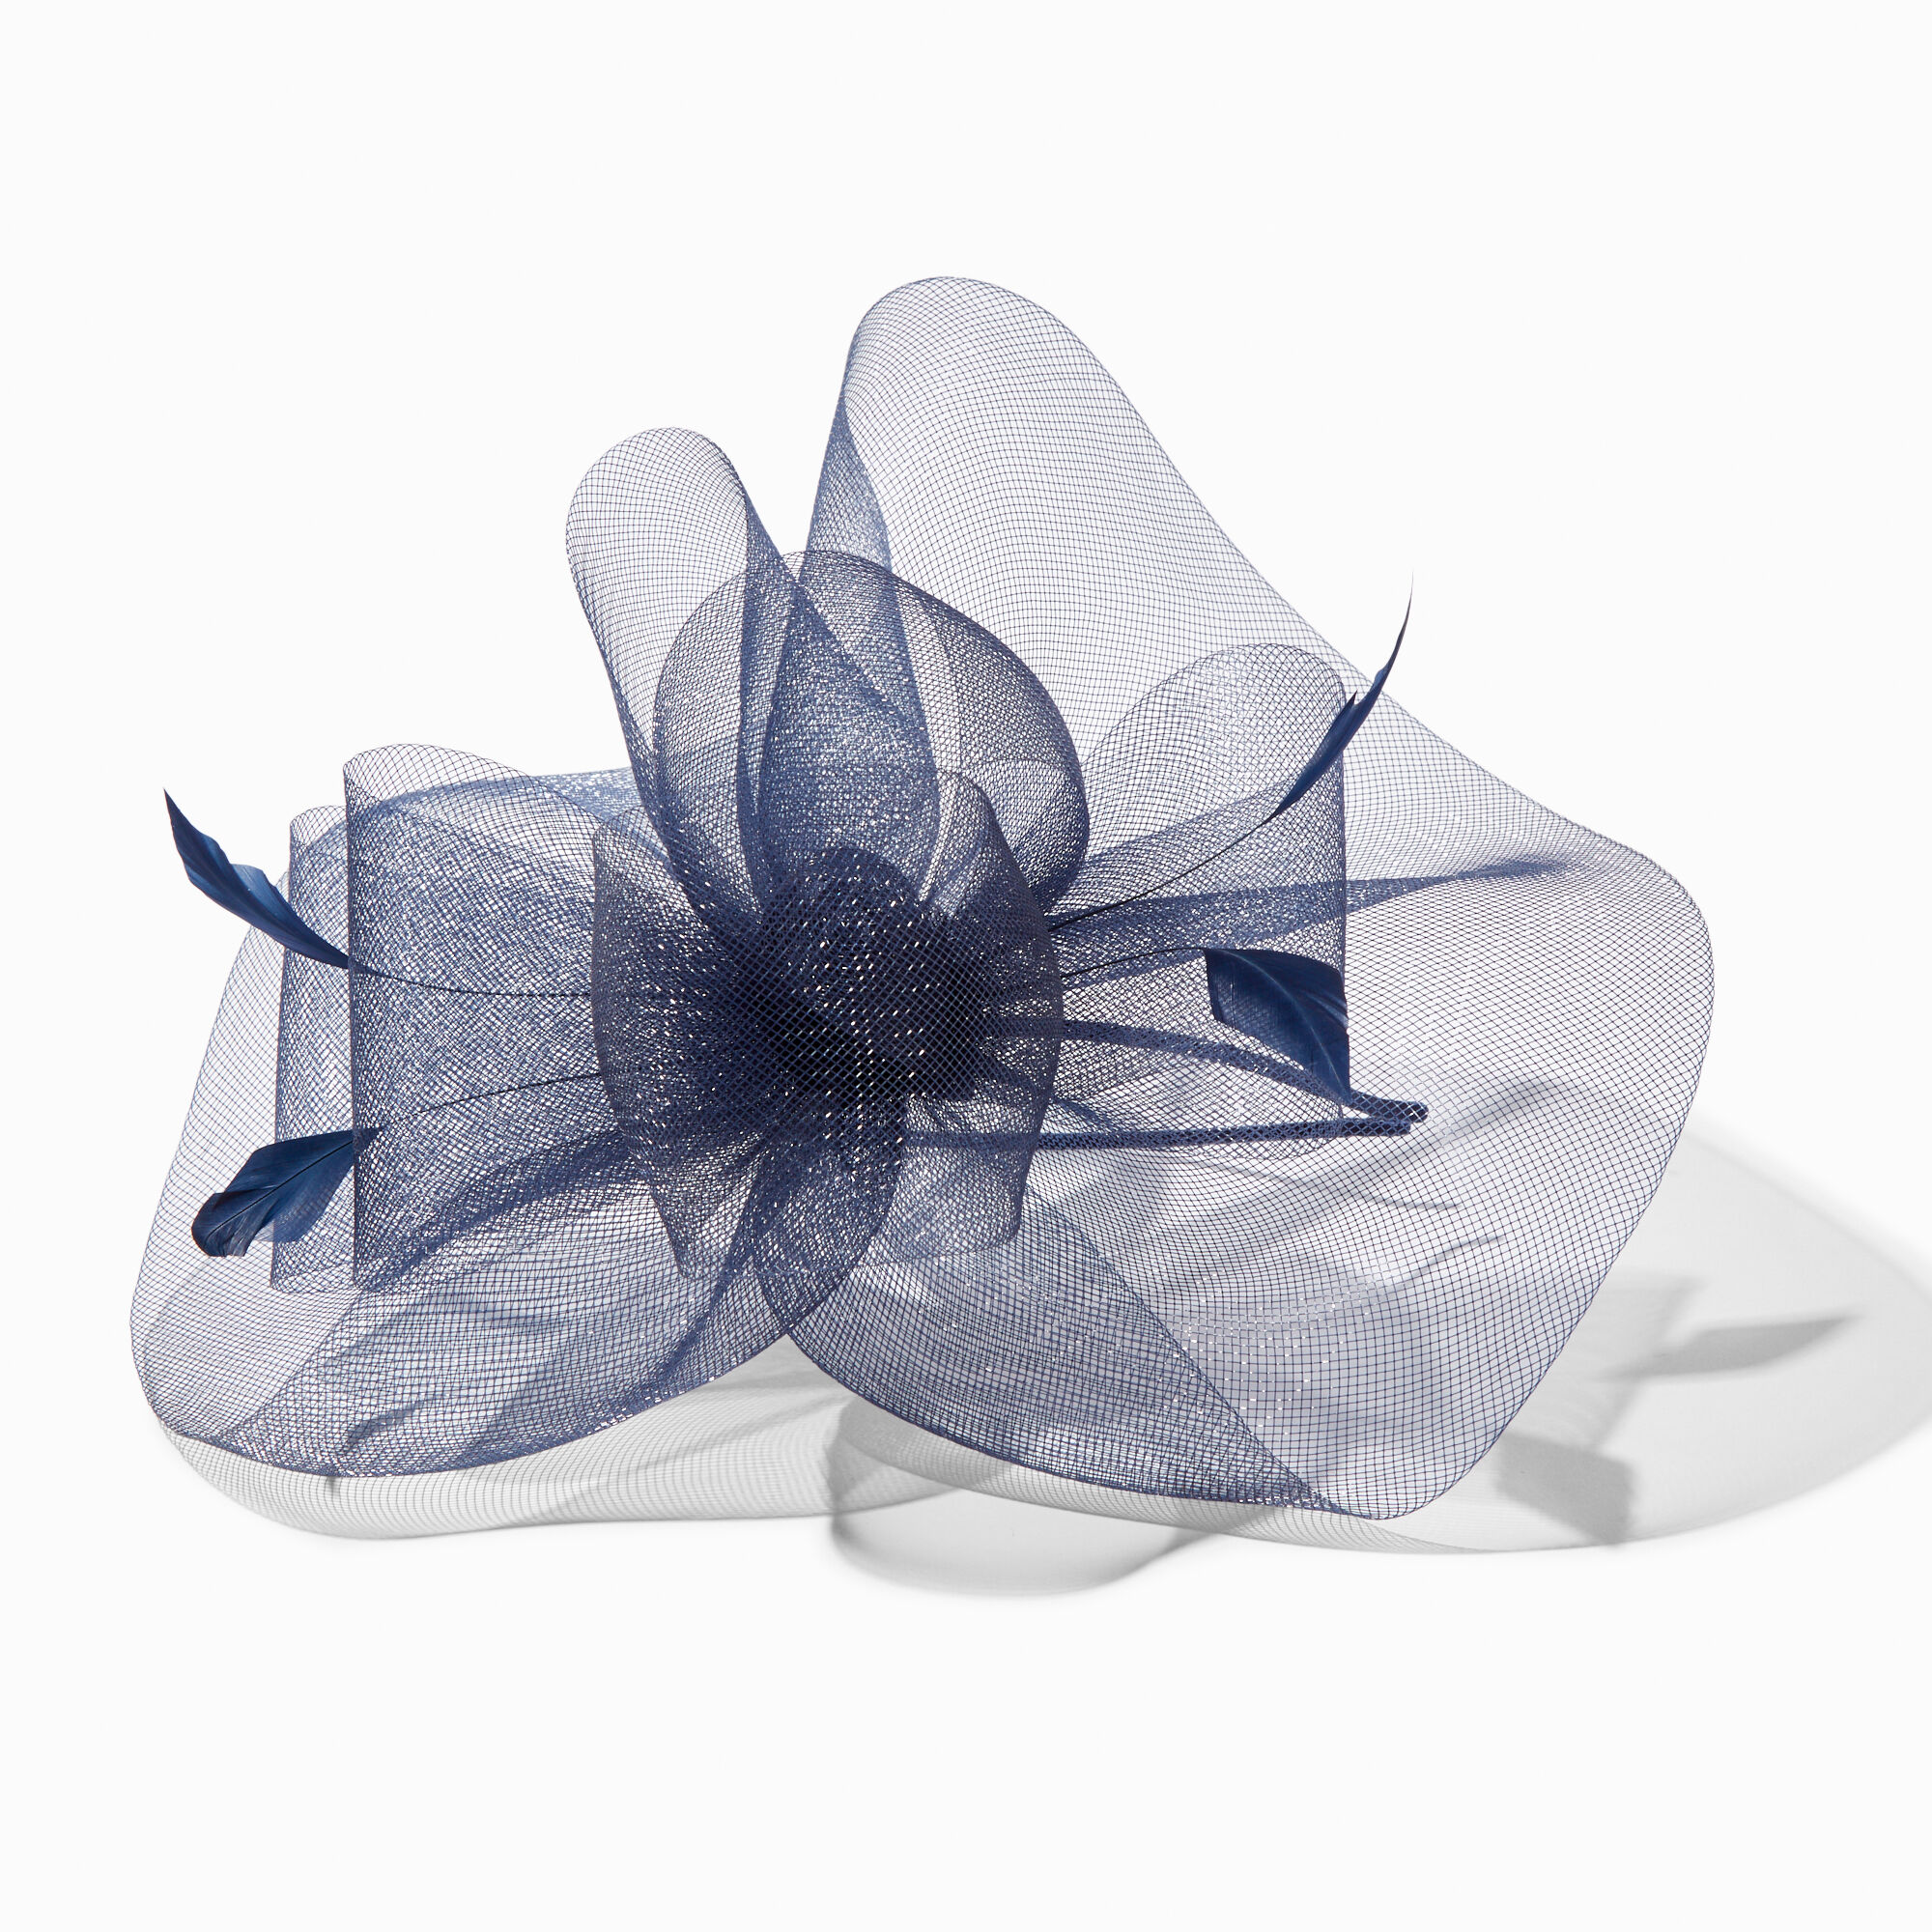 View Claires Large Swirl Fascinator Navy Blue information